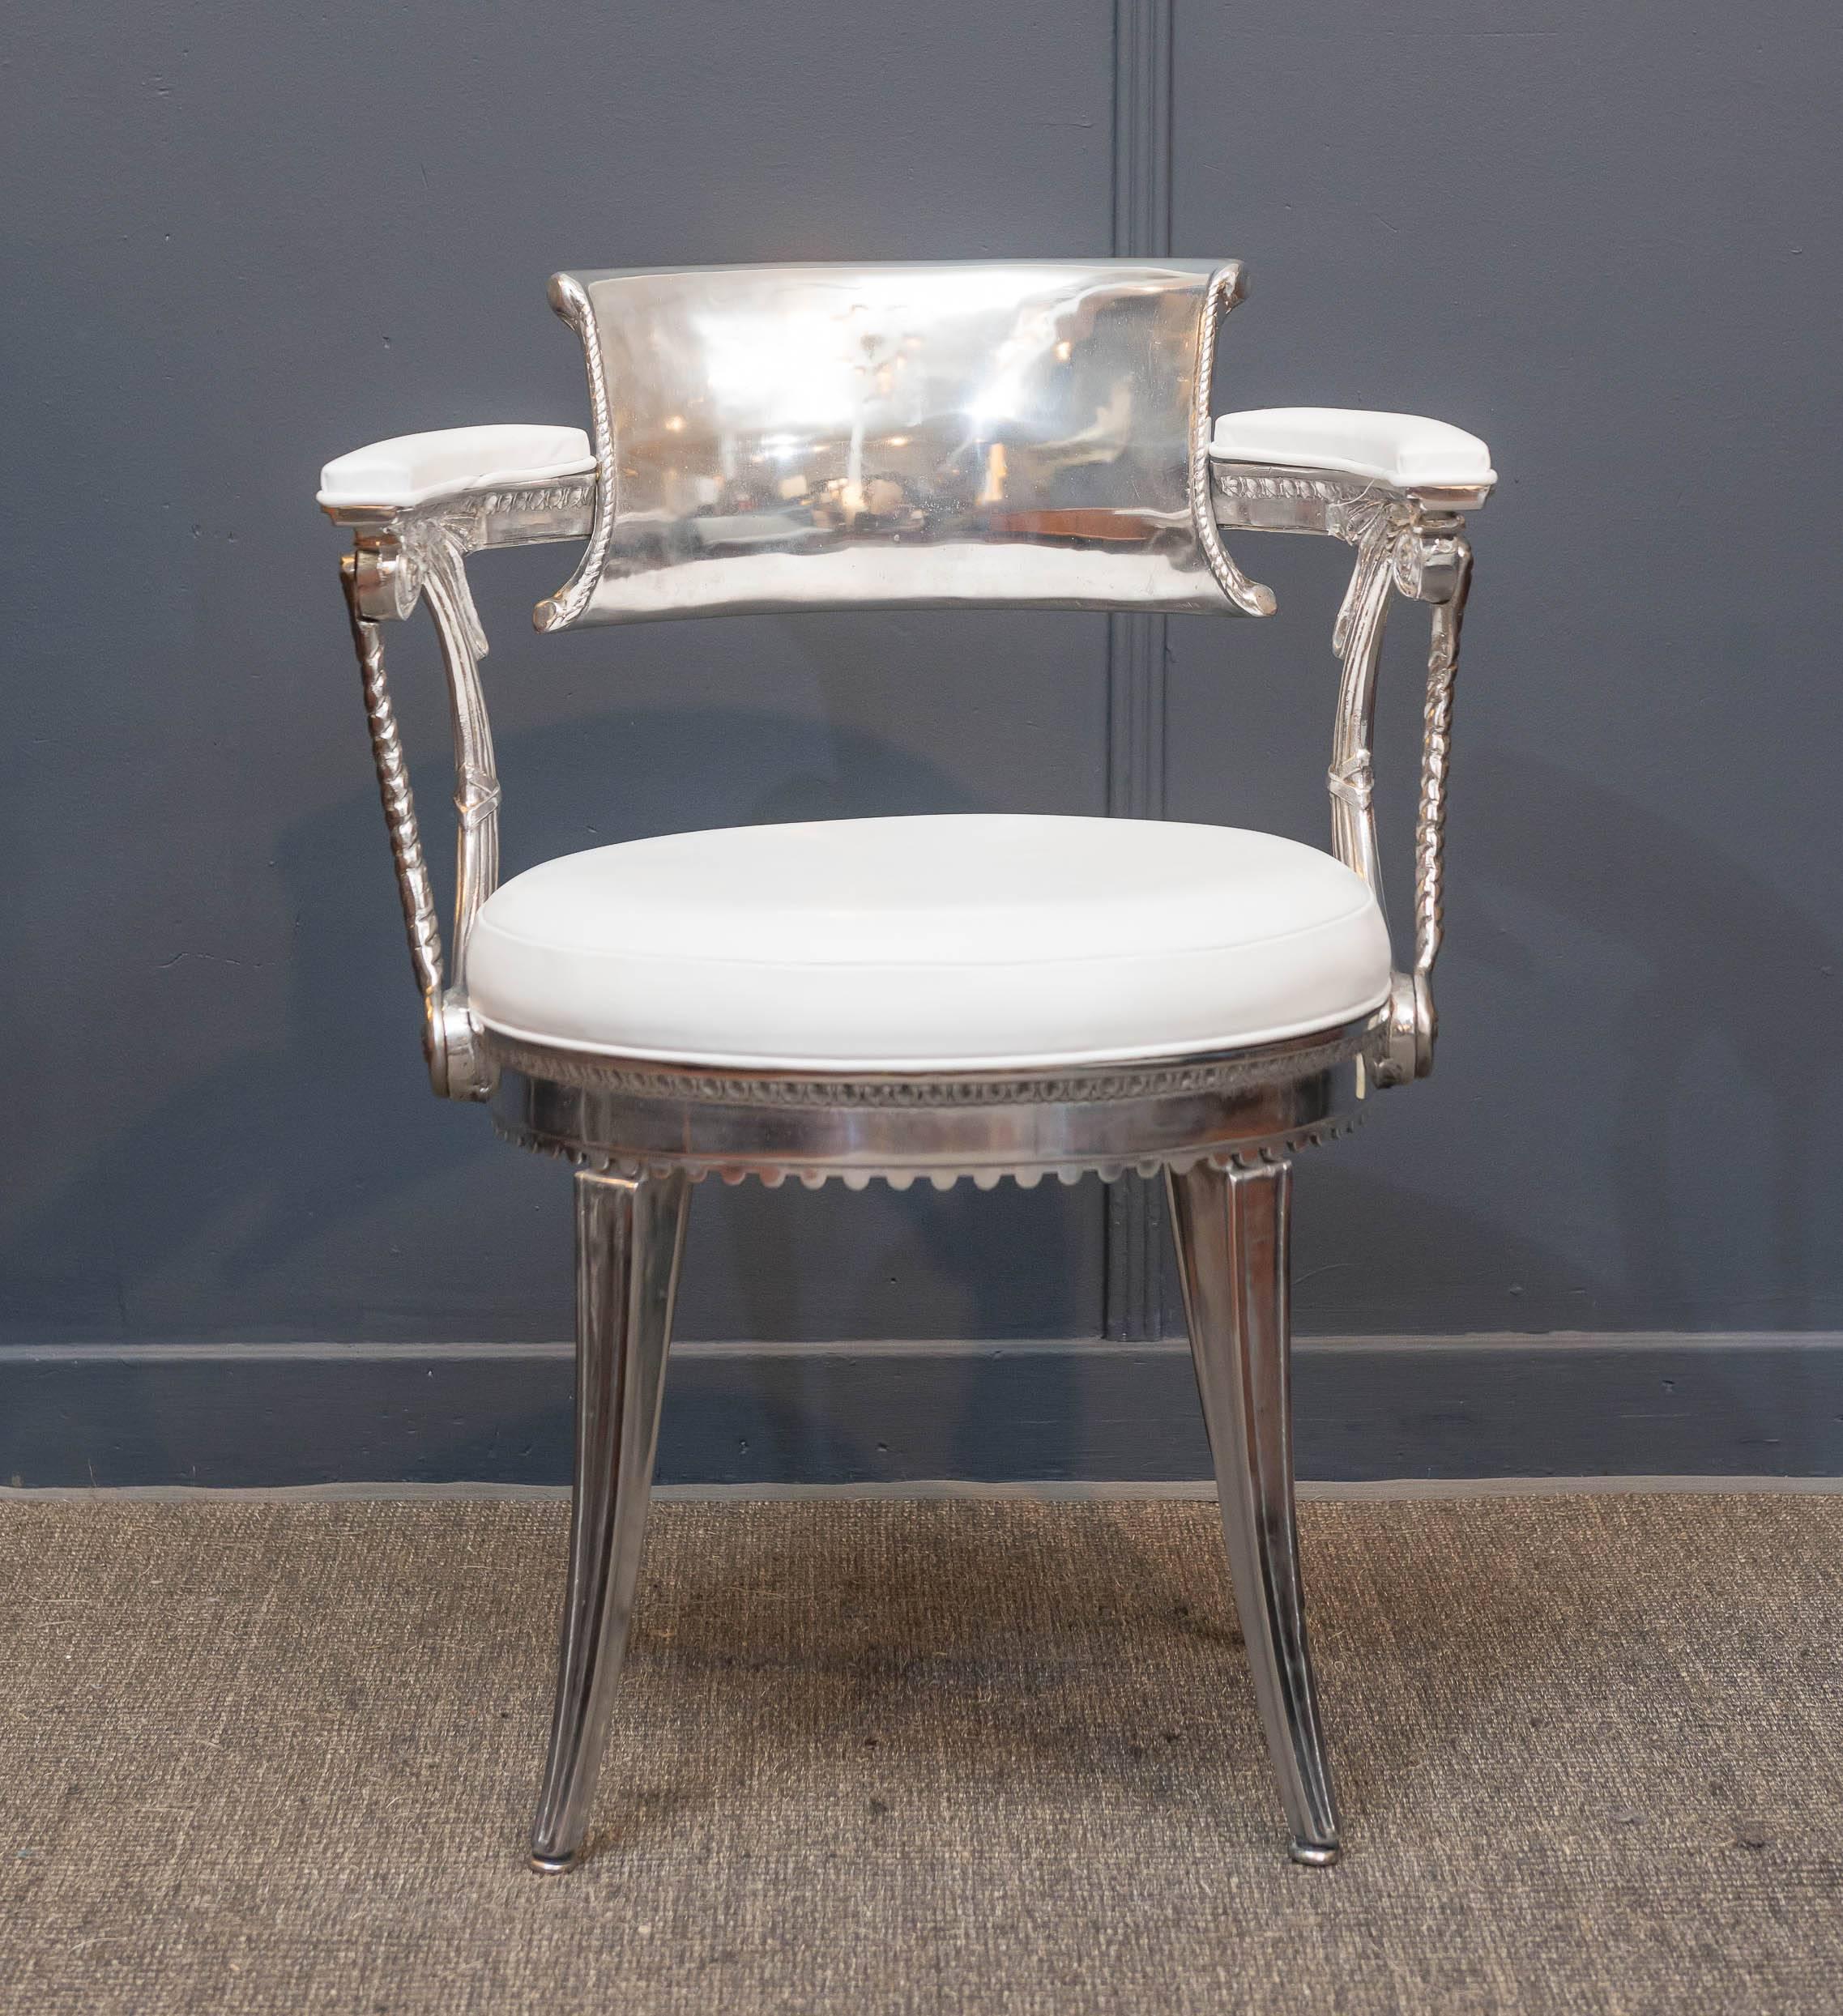 Pair of rare Dorothy Draper design armchairs from the highly acclaimed commission for Fairmont Hotel in San Francisco, 1947. 
The armchairs adorn a crown on the back which signifies they were used in the Crown dining room.

Polished cast aluminum